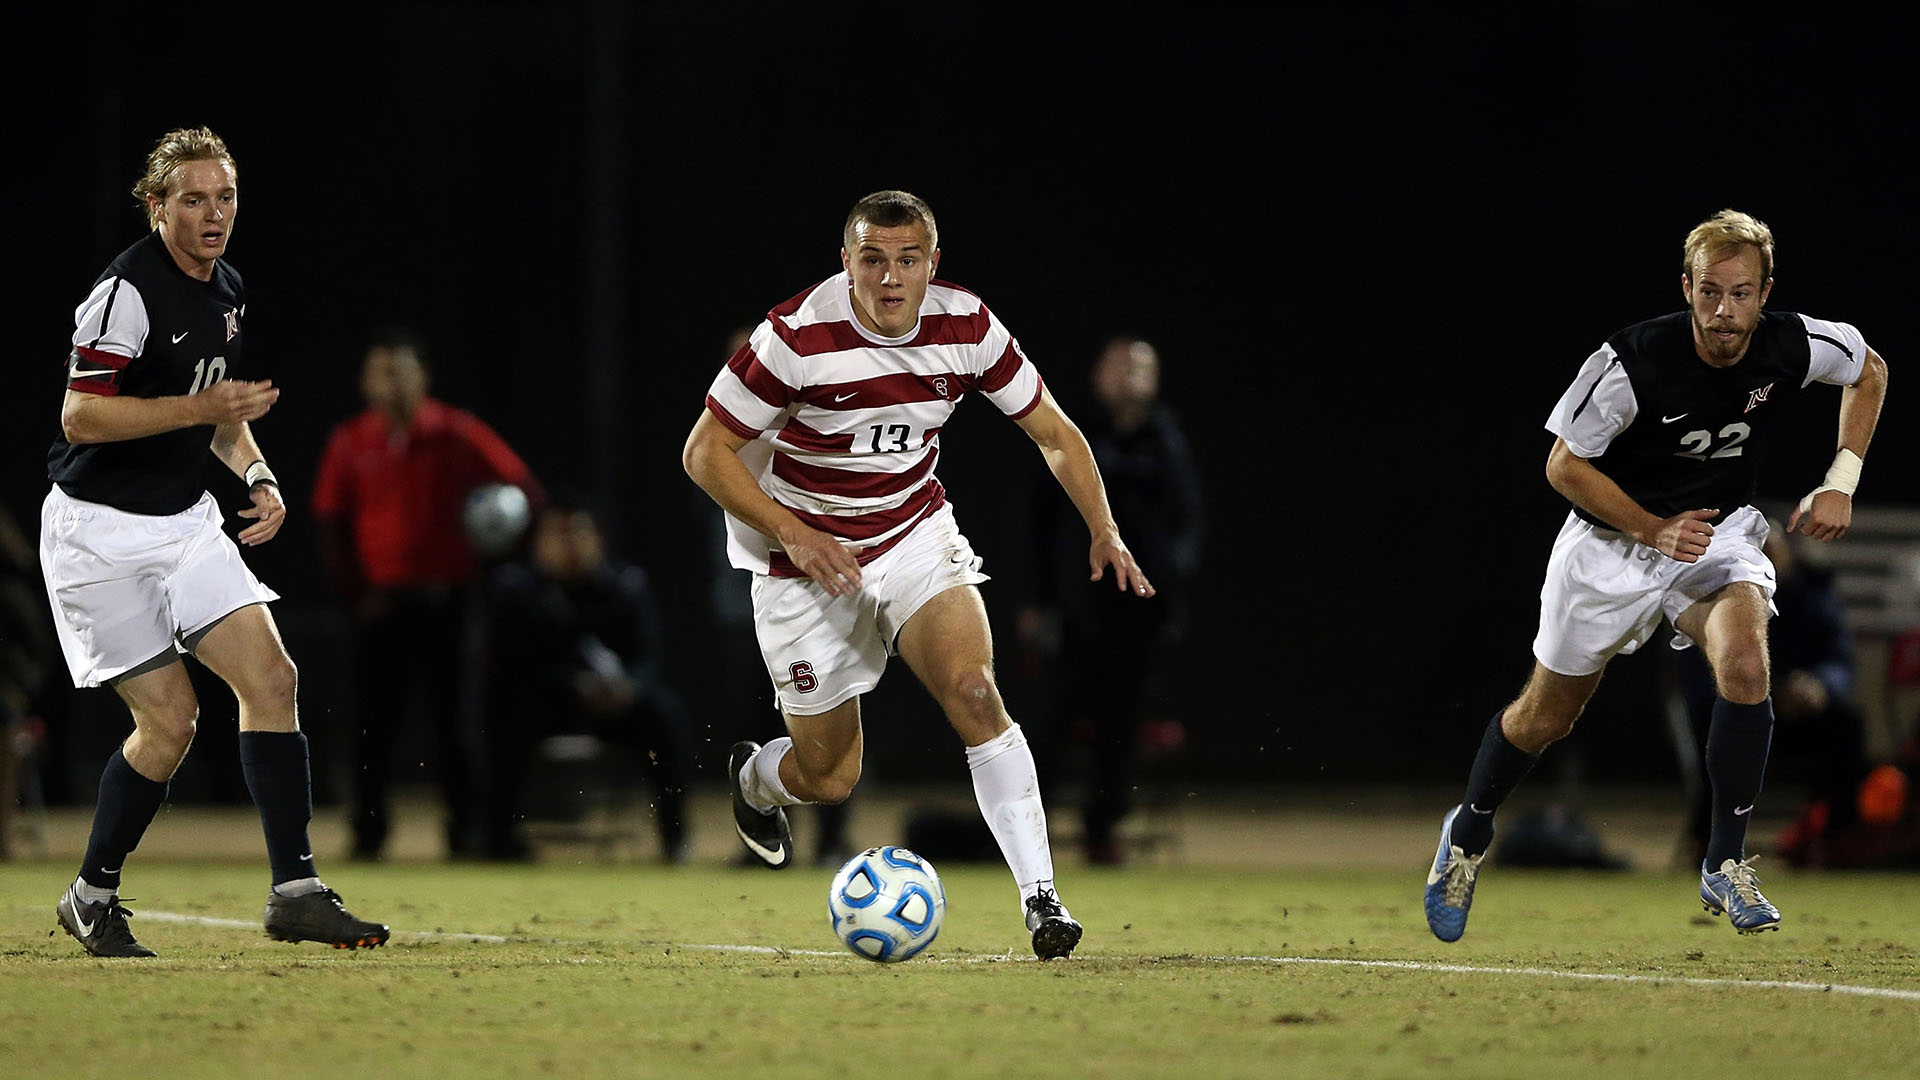 A homegrown talent of the Western Conference club, he returned home in 2016 after a stint with the Stanford Cardinal. With them, he won the Hermann Trophy in 2015, which is awarded to the best collegiate player. His quality was evident from the start.